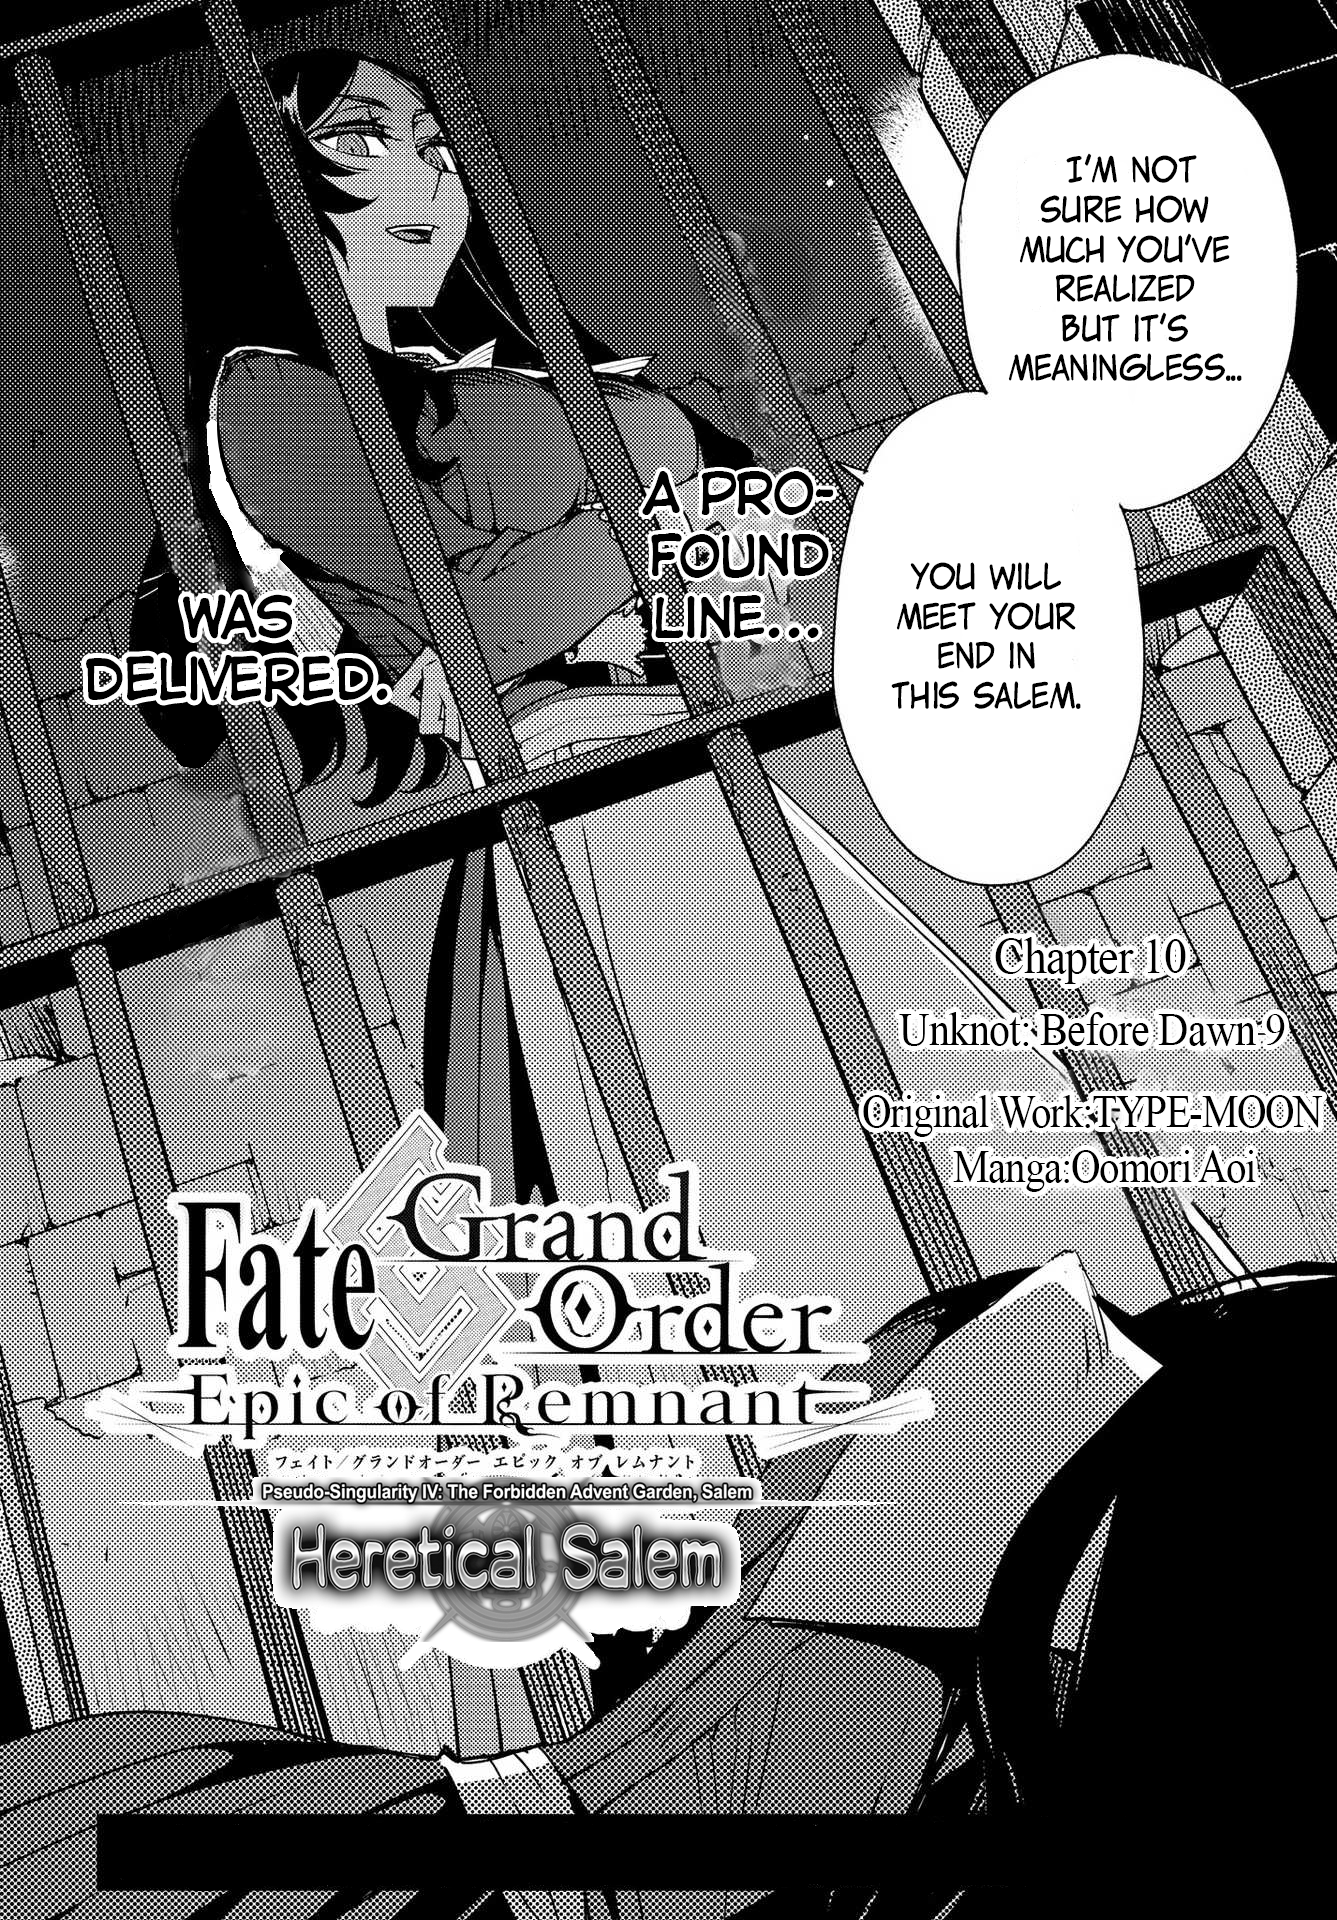 Fate/Grand Order: Epic of Remnant - Subspecies Singularity IV: Taboo Advent Salem: Salem of Heresy - chapter 10 - #2